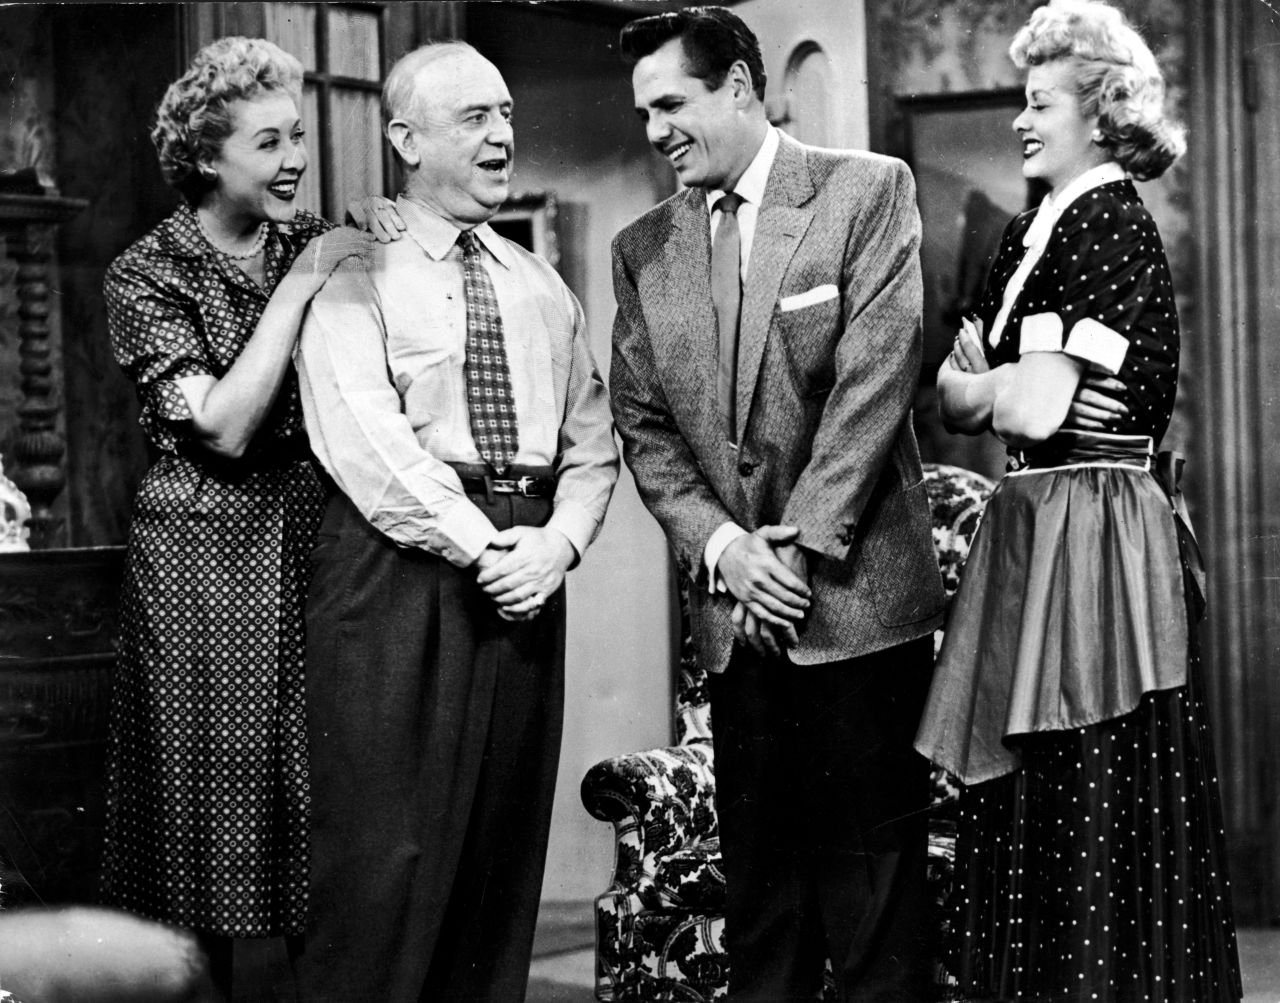 From left, stars Vivian Vance, William Frawley, Desi Arnaz and Lucille Ball talk on the set. "I Love Lucy" invented rerunning episodes when Ball became pregnant and needed rest.